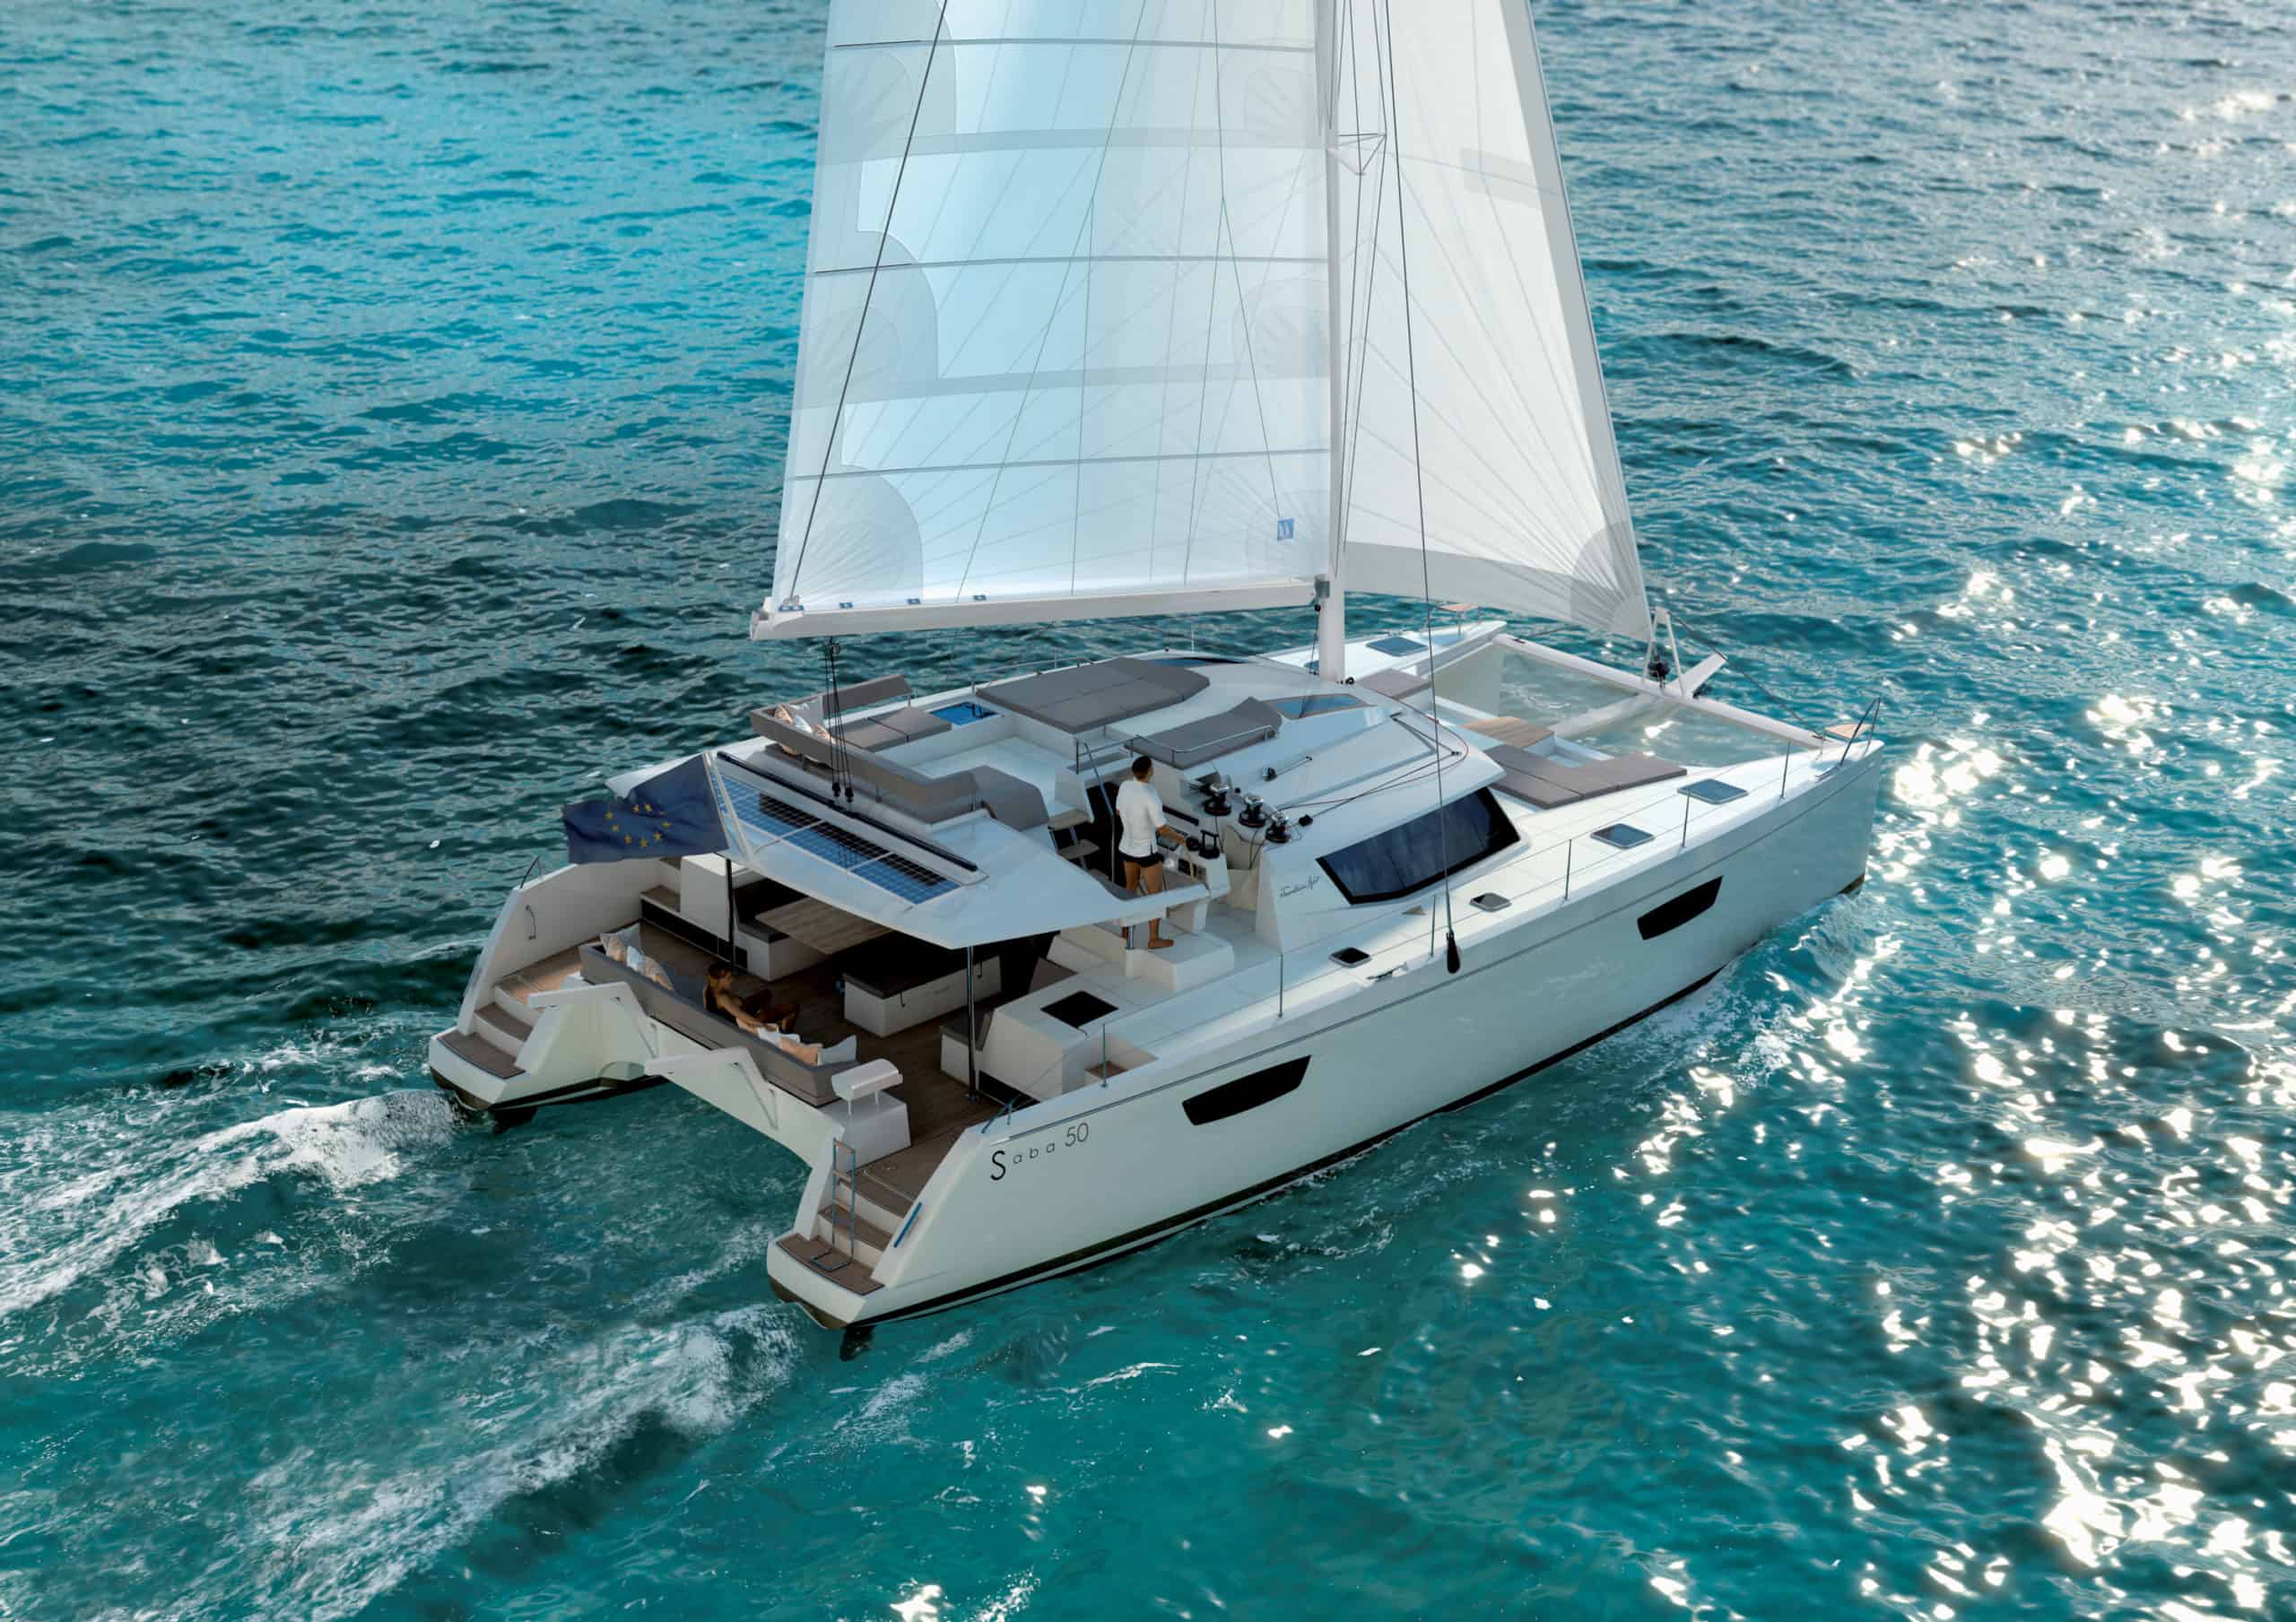 buy this saba 50 catamaran and save big with section 179 tax deductions extended for 2014